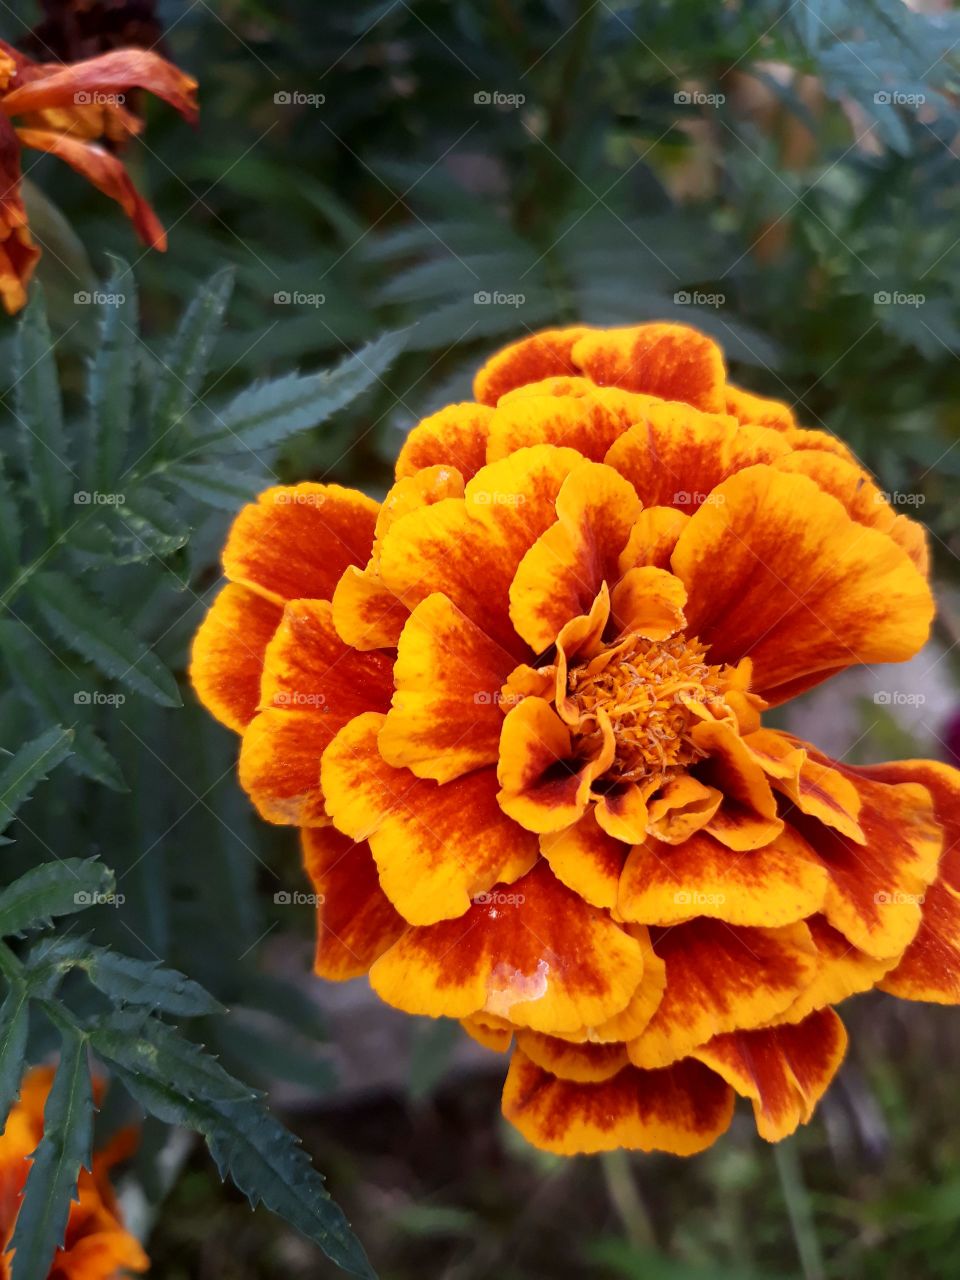 This is rare orange flame flowers and very unusual to see.